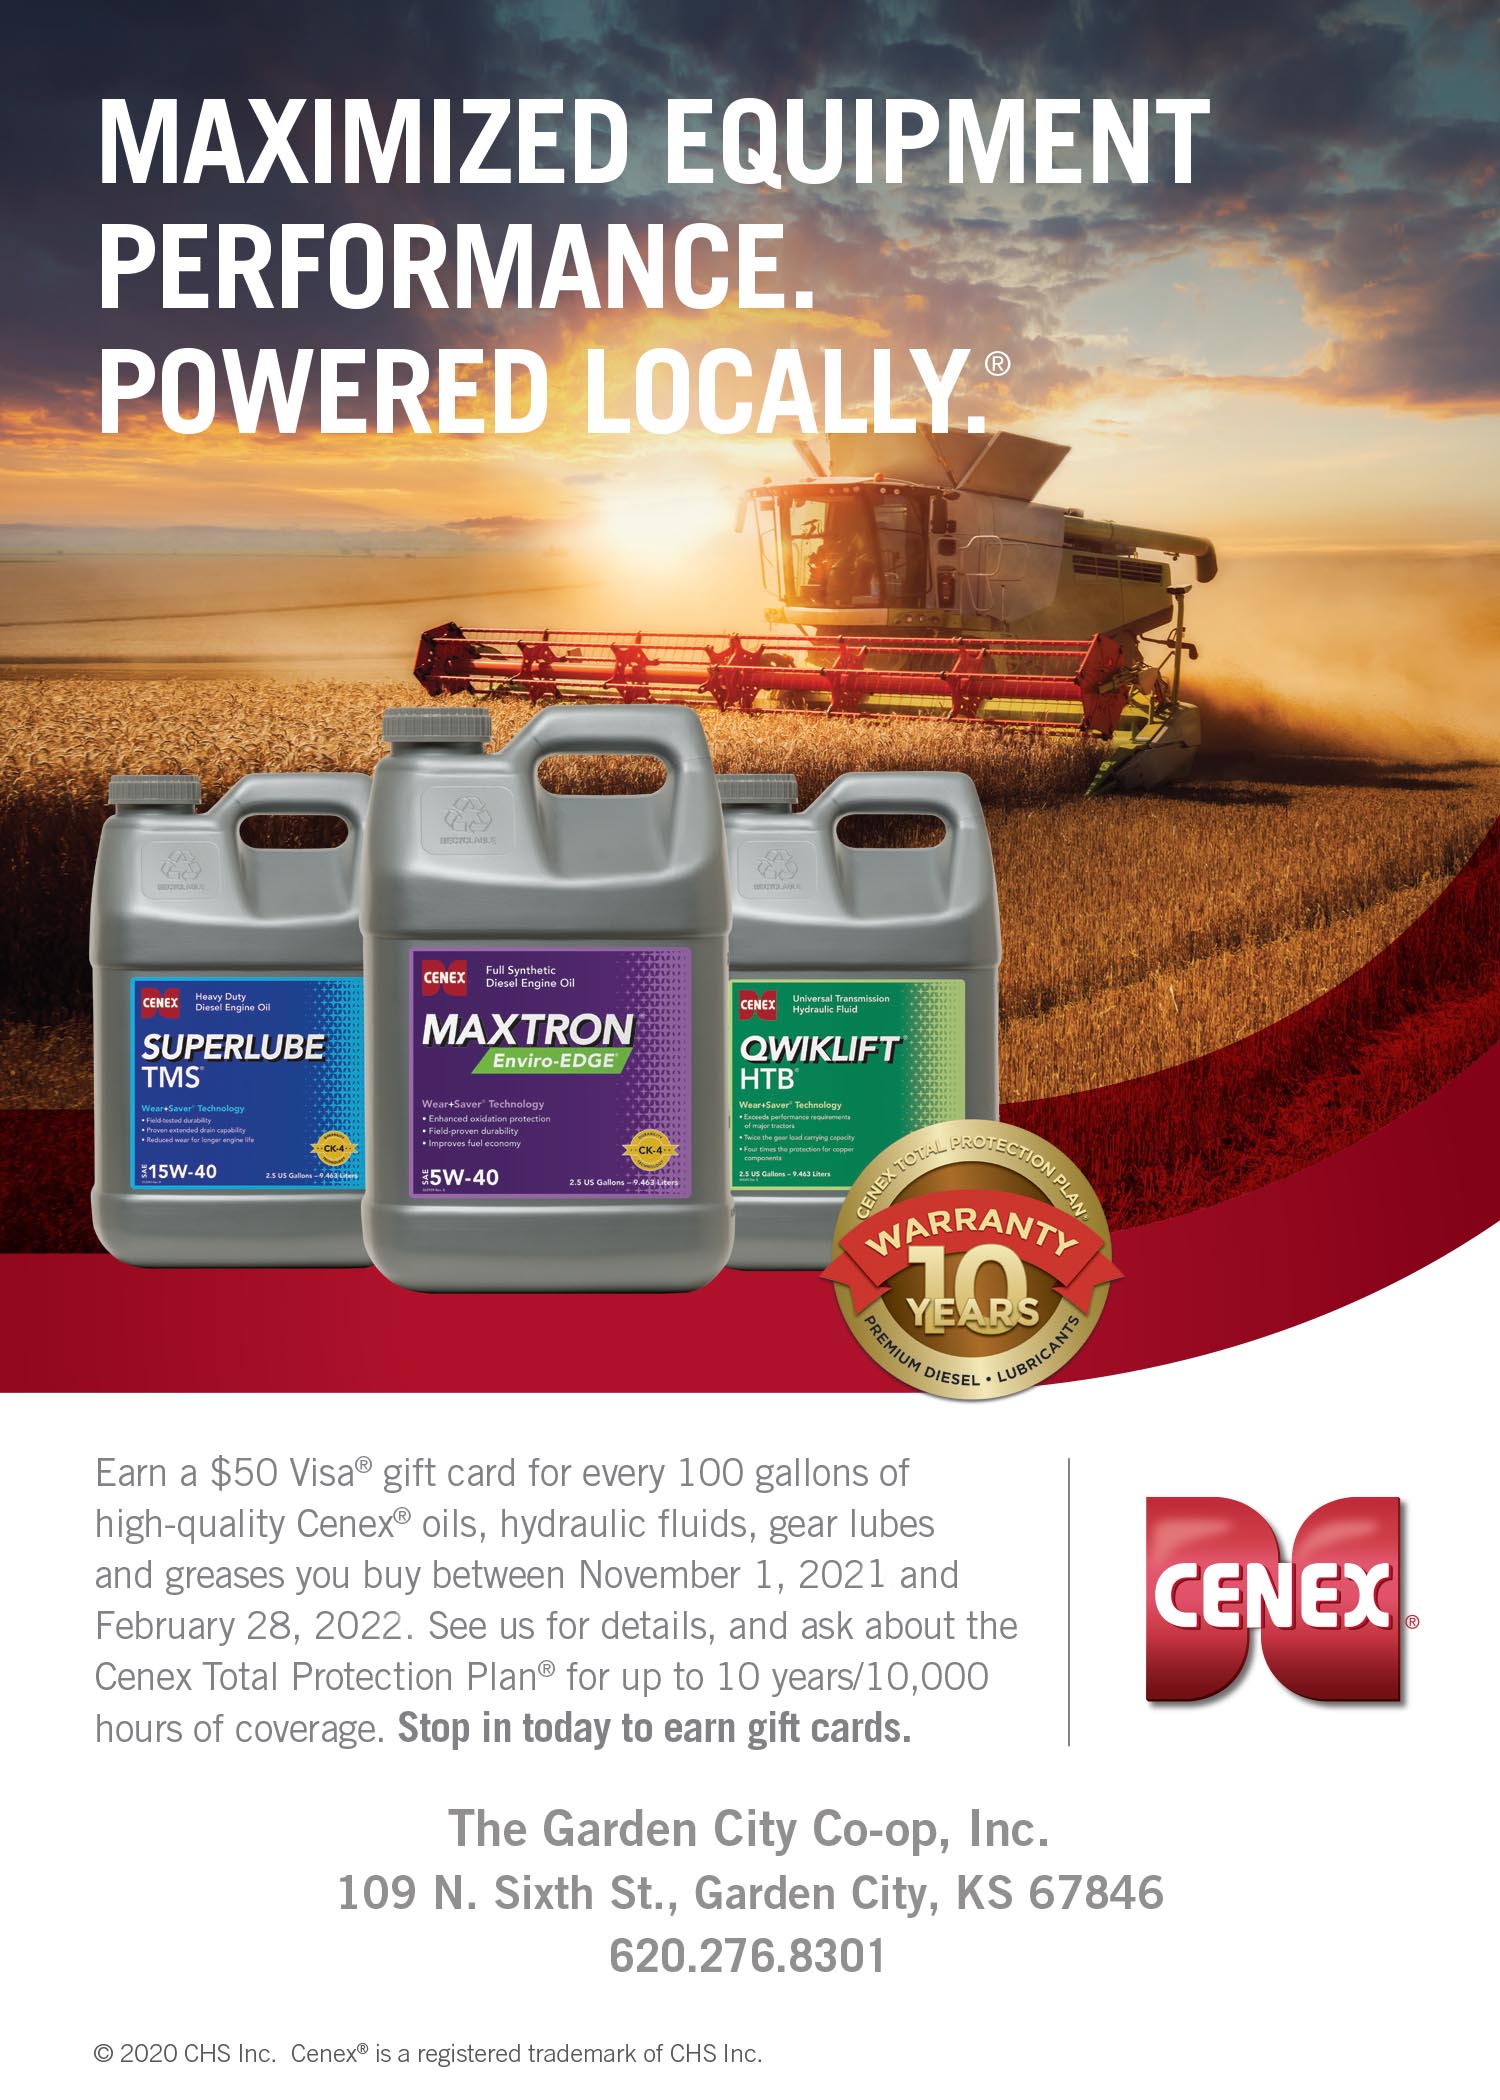 Stock Up on Oil, Grease and Gift Cards starting Nov 1